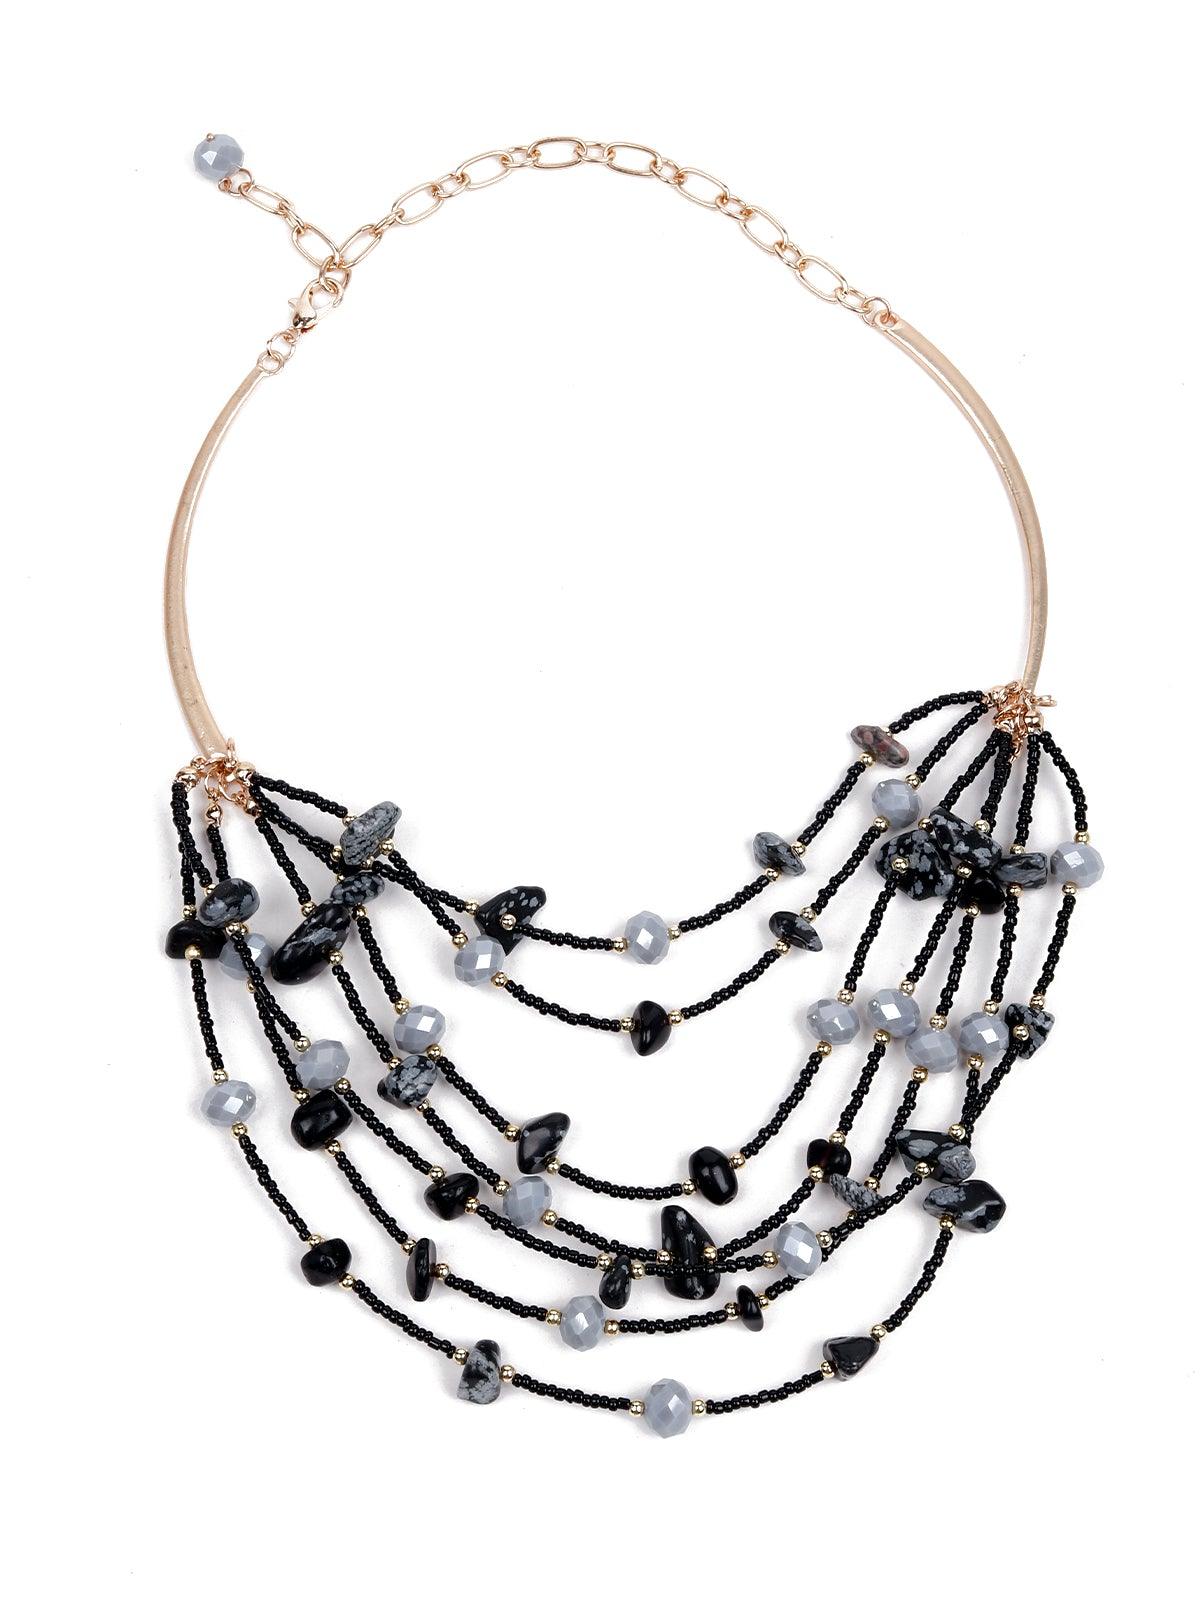 Gorgeous Black And Grey Hue Beaded Necklace - Odette